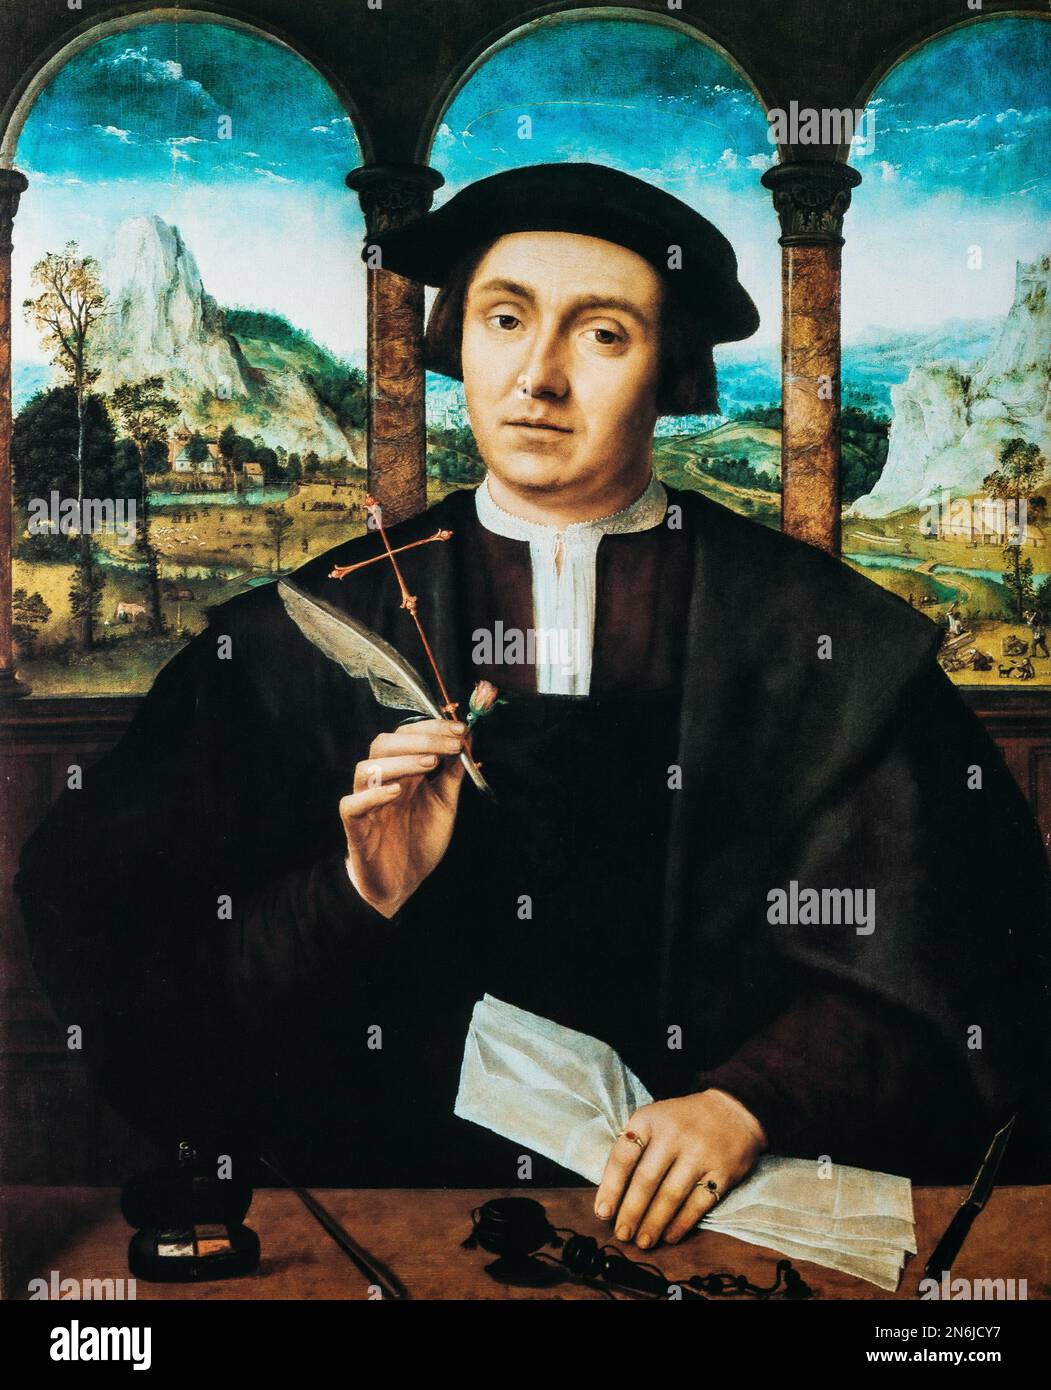 Quentin Massys, Portrait Of A Man. Quentin Matsys Was A Flemish Painter In Early Netherlandish Tradition. Regarded As Founder Of Antwerp School Of Stock Photo